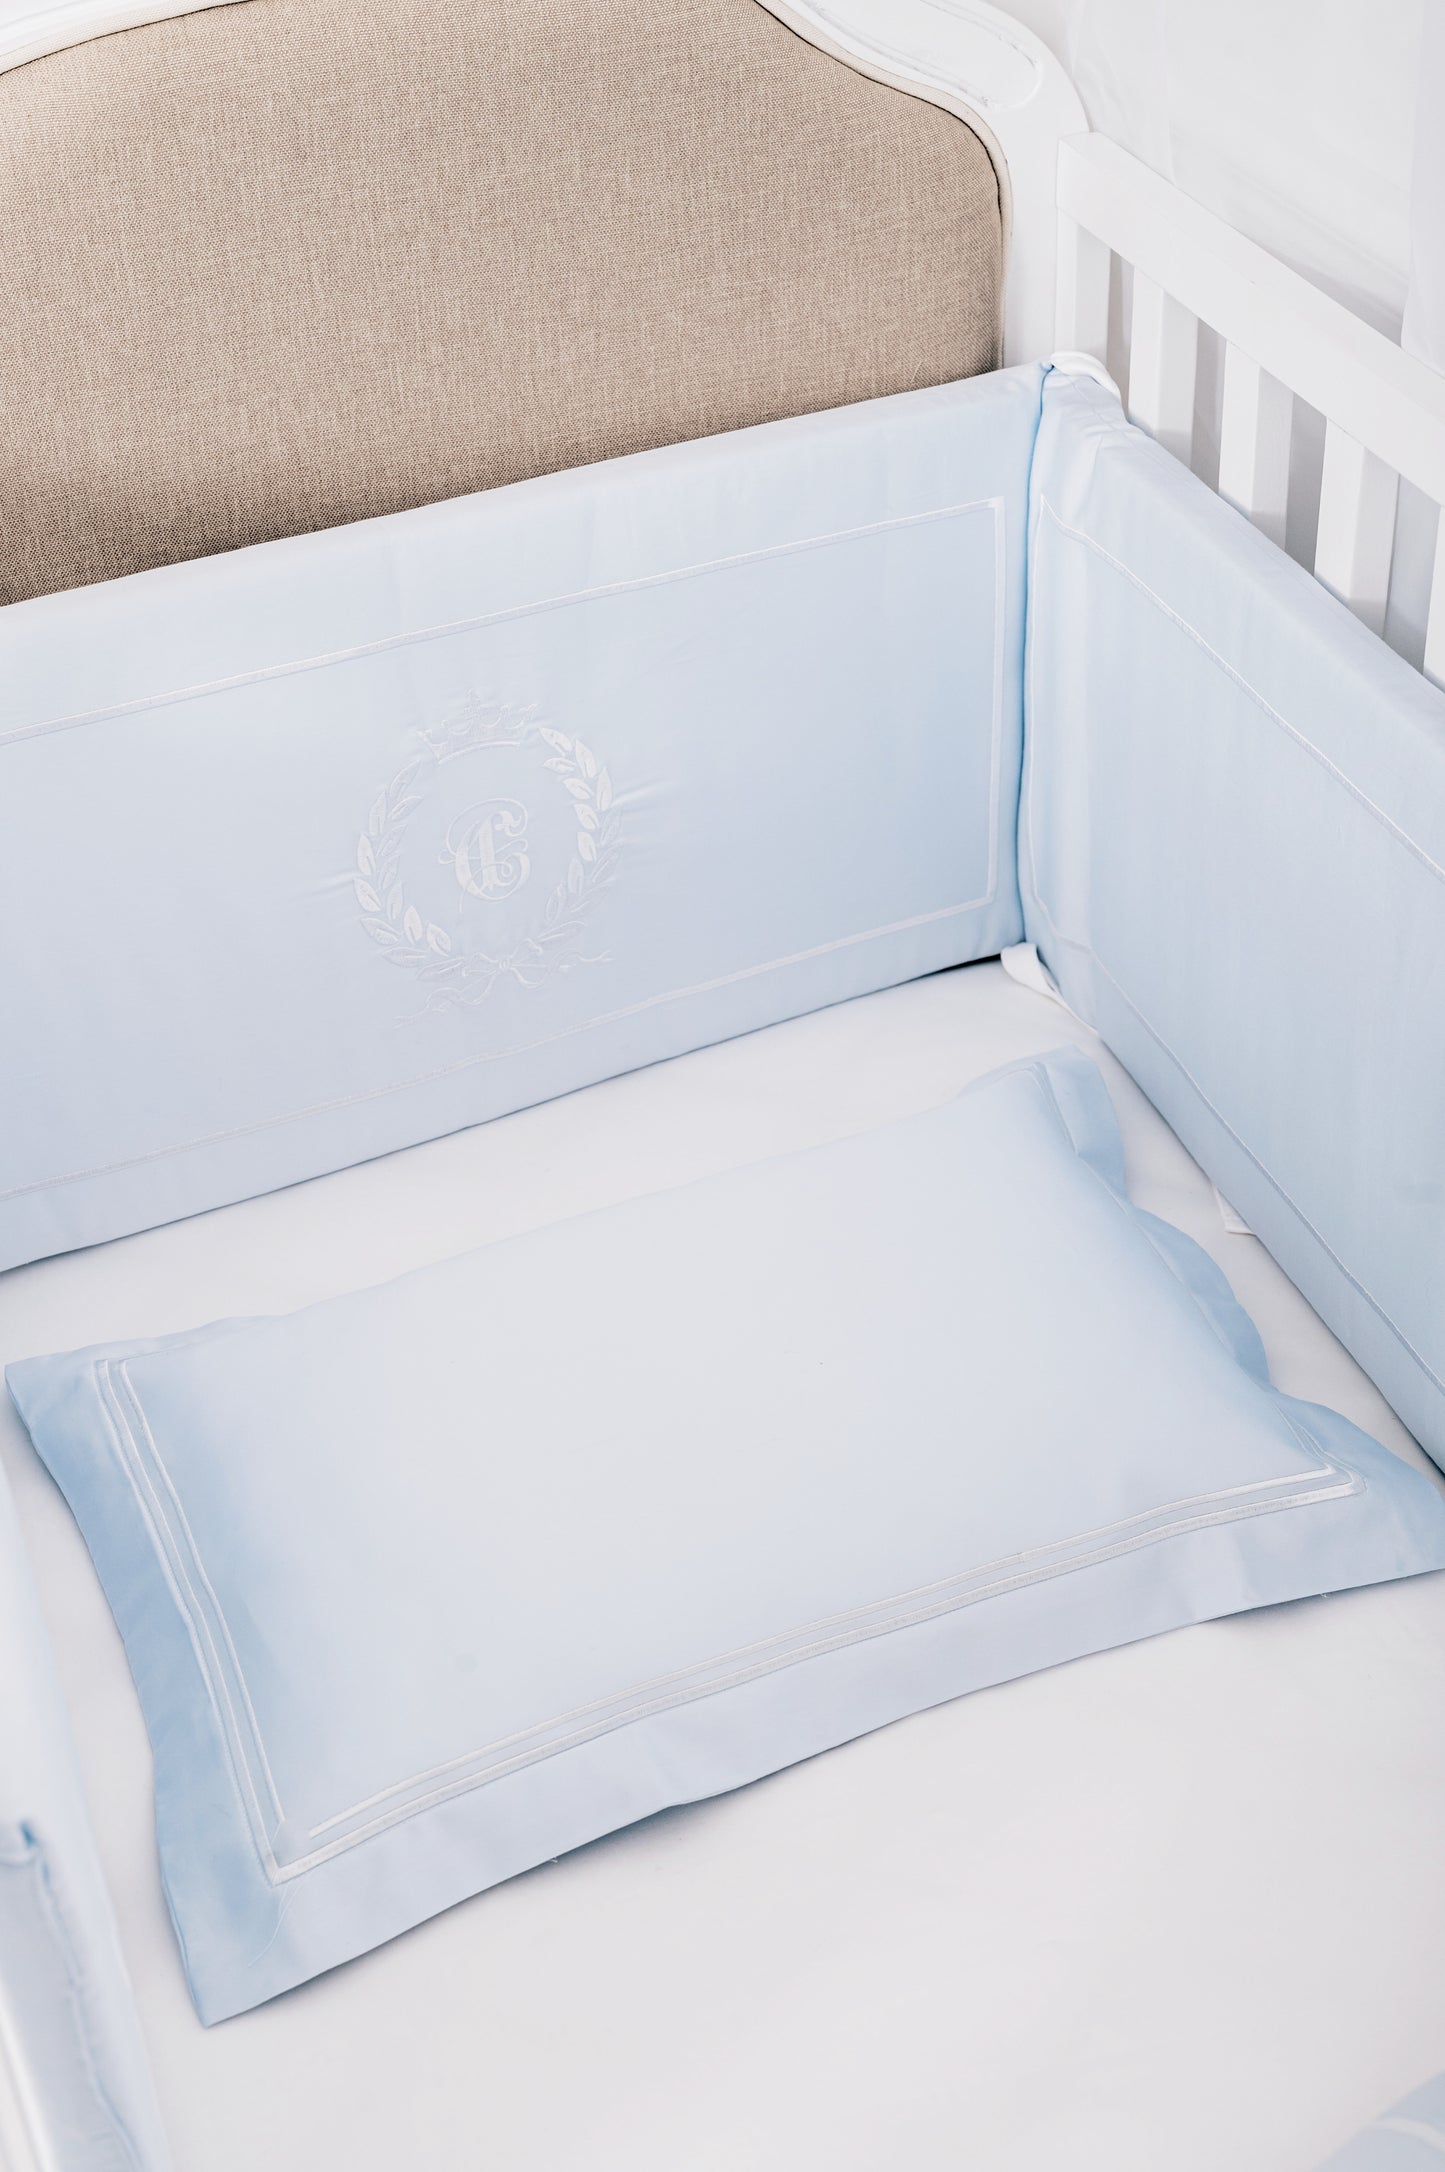 The Egyptian Cotton Nursery Collection Baby Bedding Set - Dreamy Blue